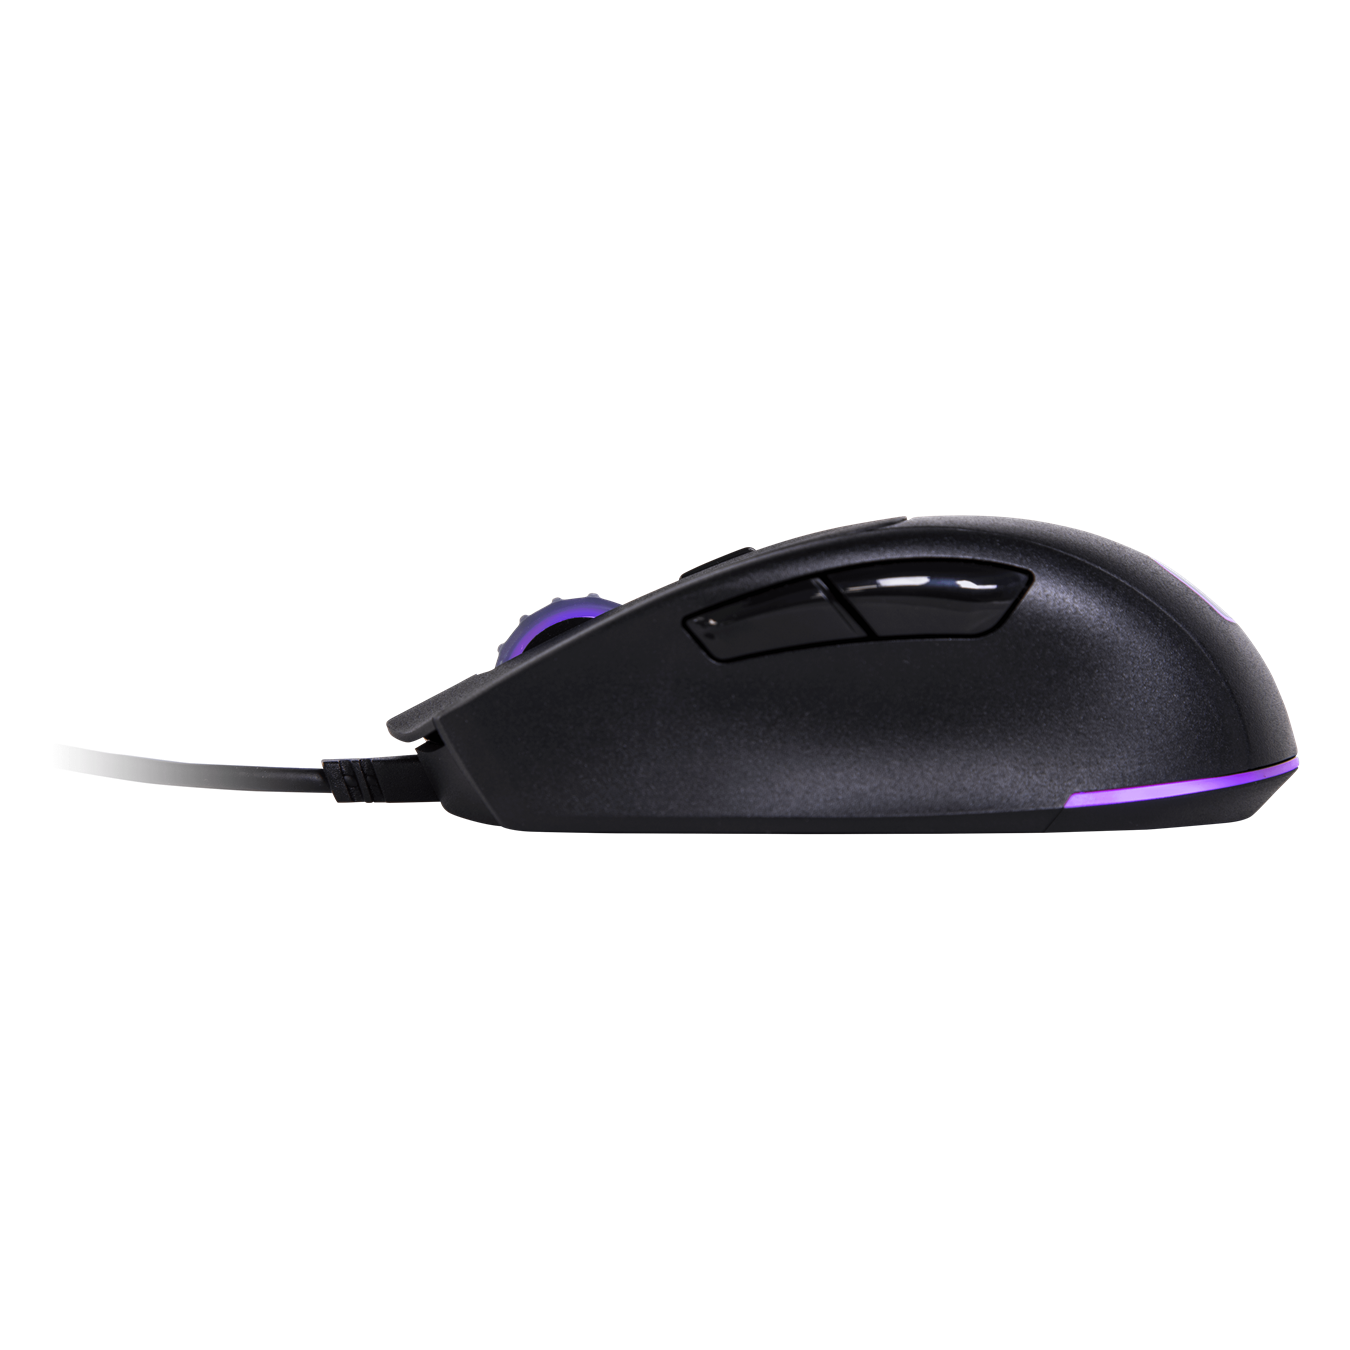 MasterMouse MM520 Gaming Mouse - Fully Programmable with user friendly software interface to customize lighting, buttons assignments, macro’s and more.